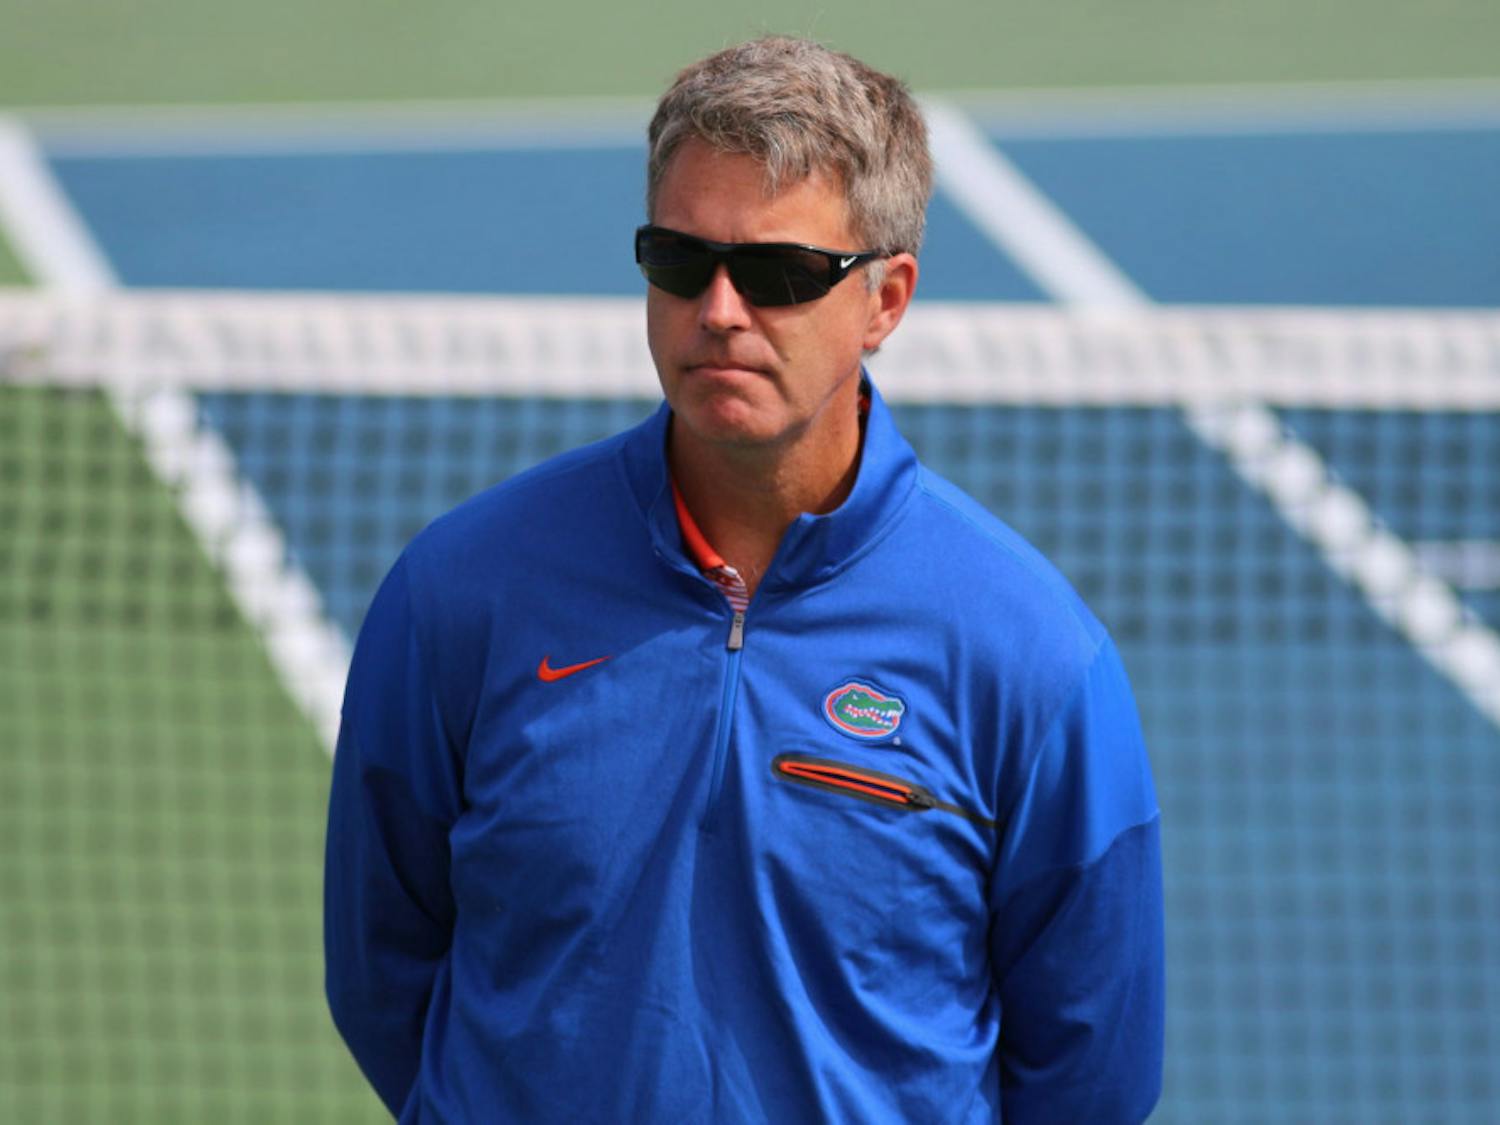 UF women's tennis coach Roland Thornqvist said he was pleased after the Gators defeated Ole Miss 4-1 on Friday to open SEC play.